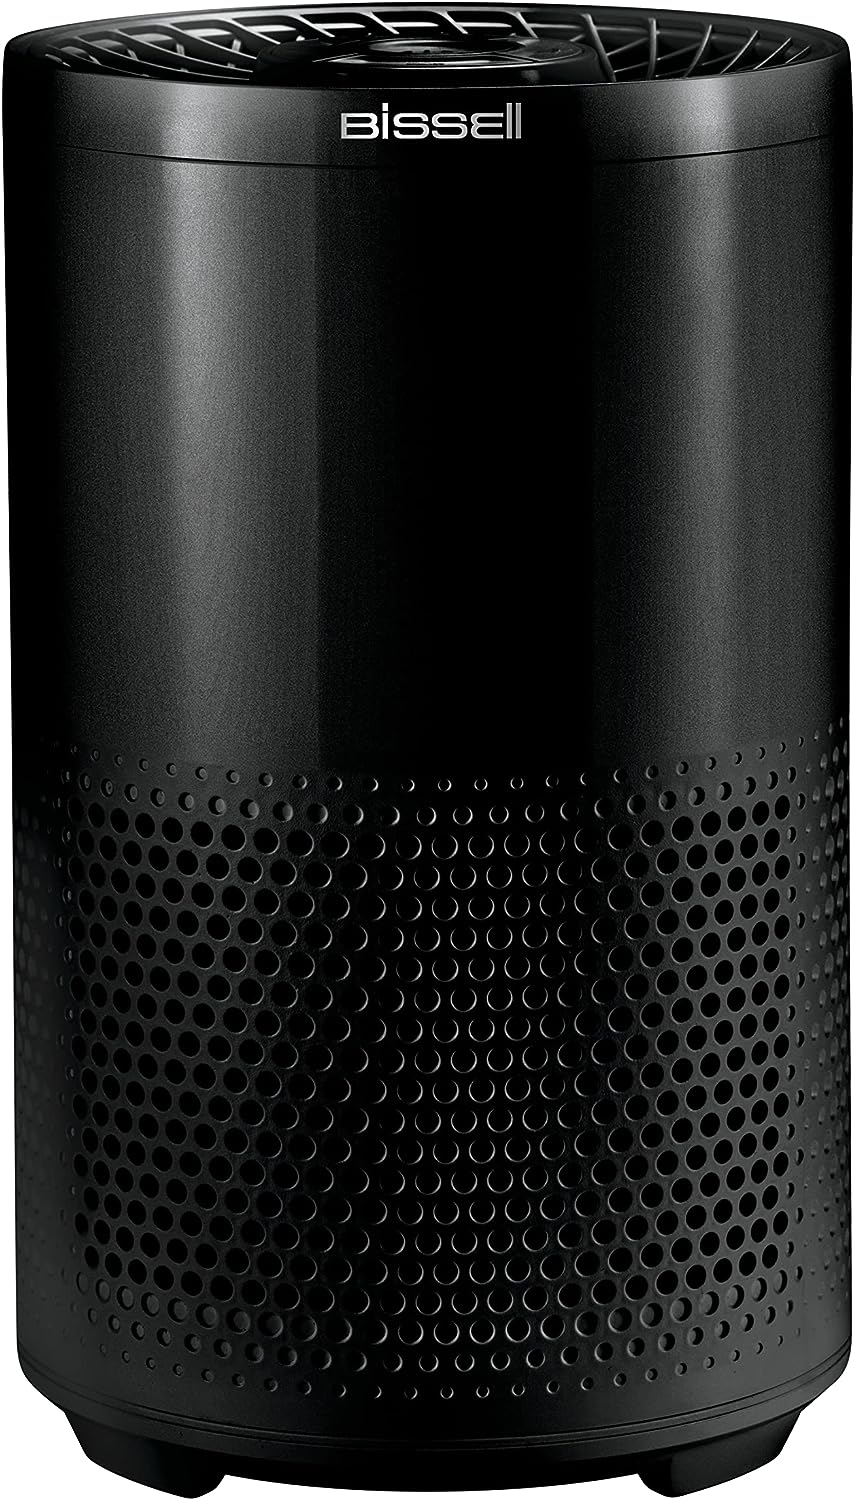 BISSELL® MYair Pro Air Purifier with HEPA and Carbon Filter - $60